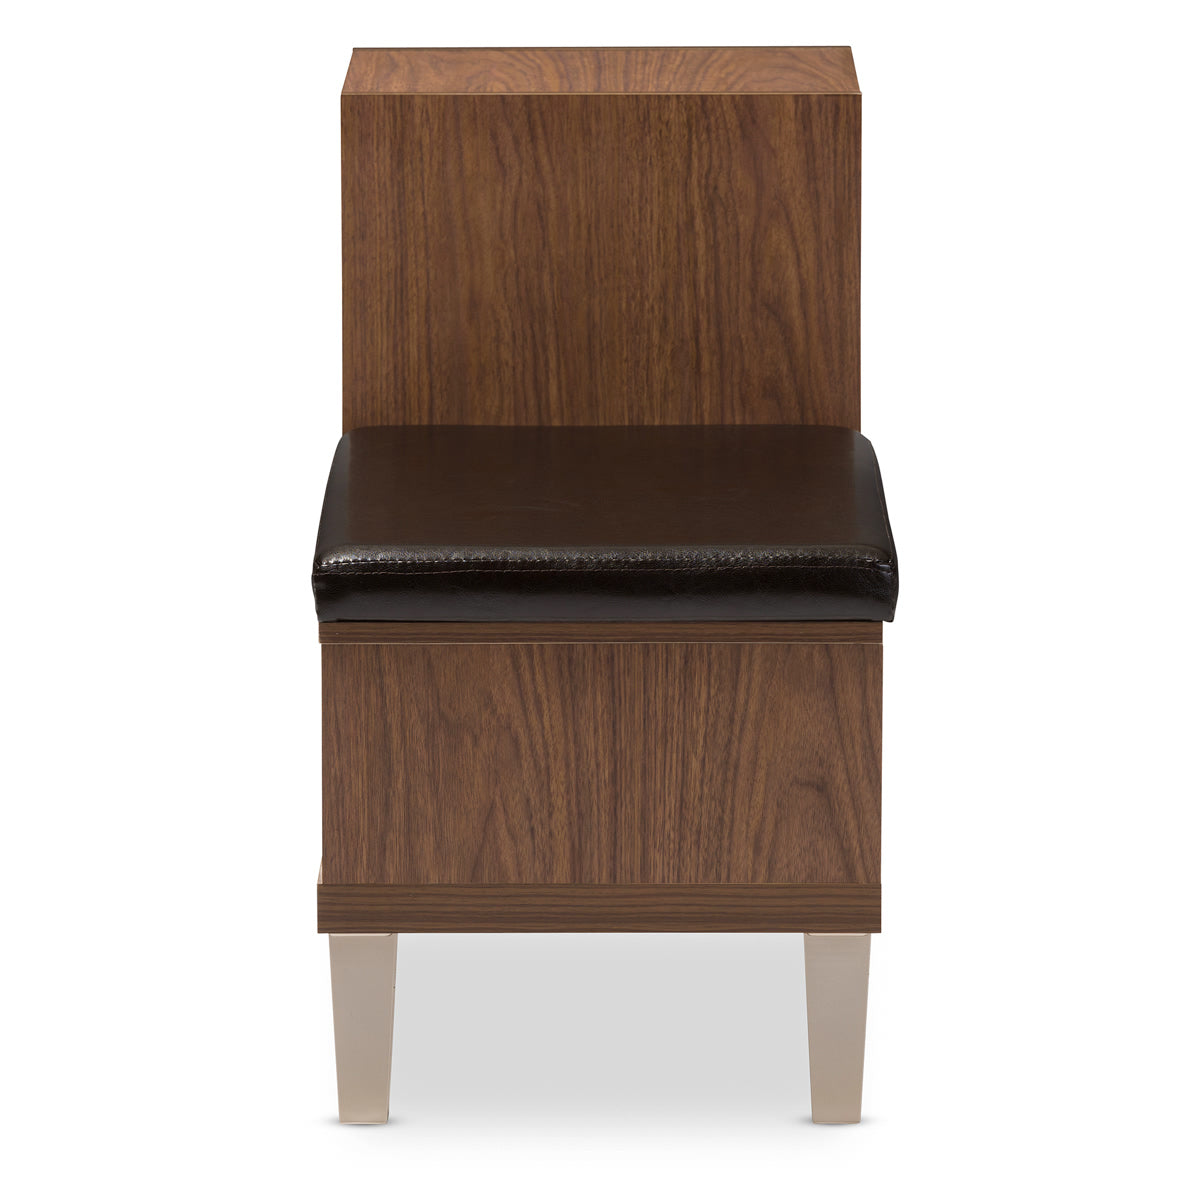 Baxton Studio Arielle Modern and Contemporary Walnut Brown Wood 3-Drawer Shoe Storage Padded Leatherette Seating Bench with Two Open Shelves Baxton Studio-benches-Minimal And Modern - 4